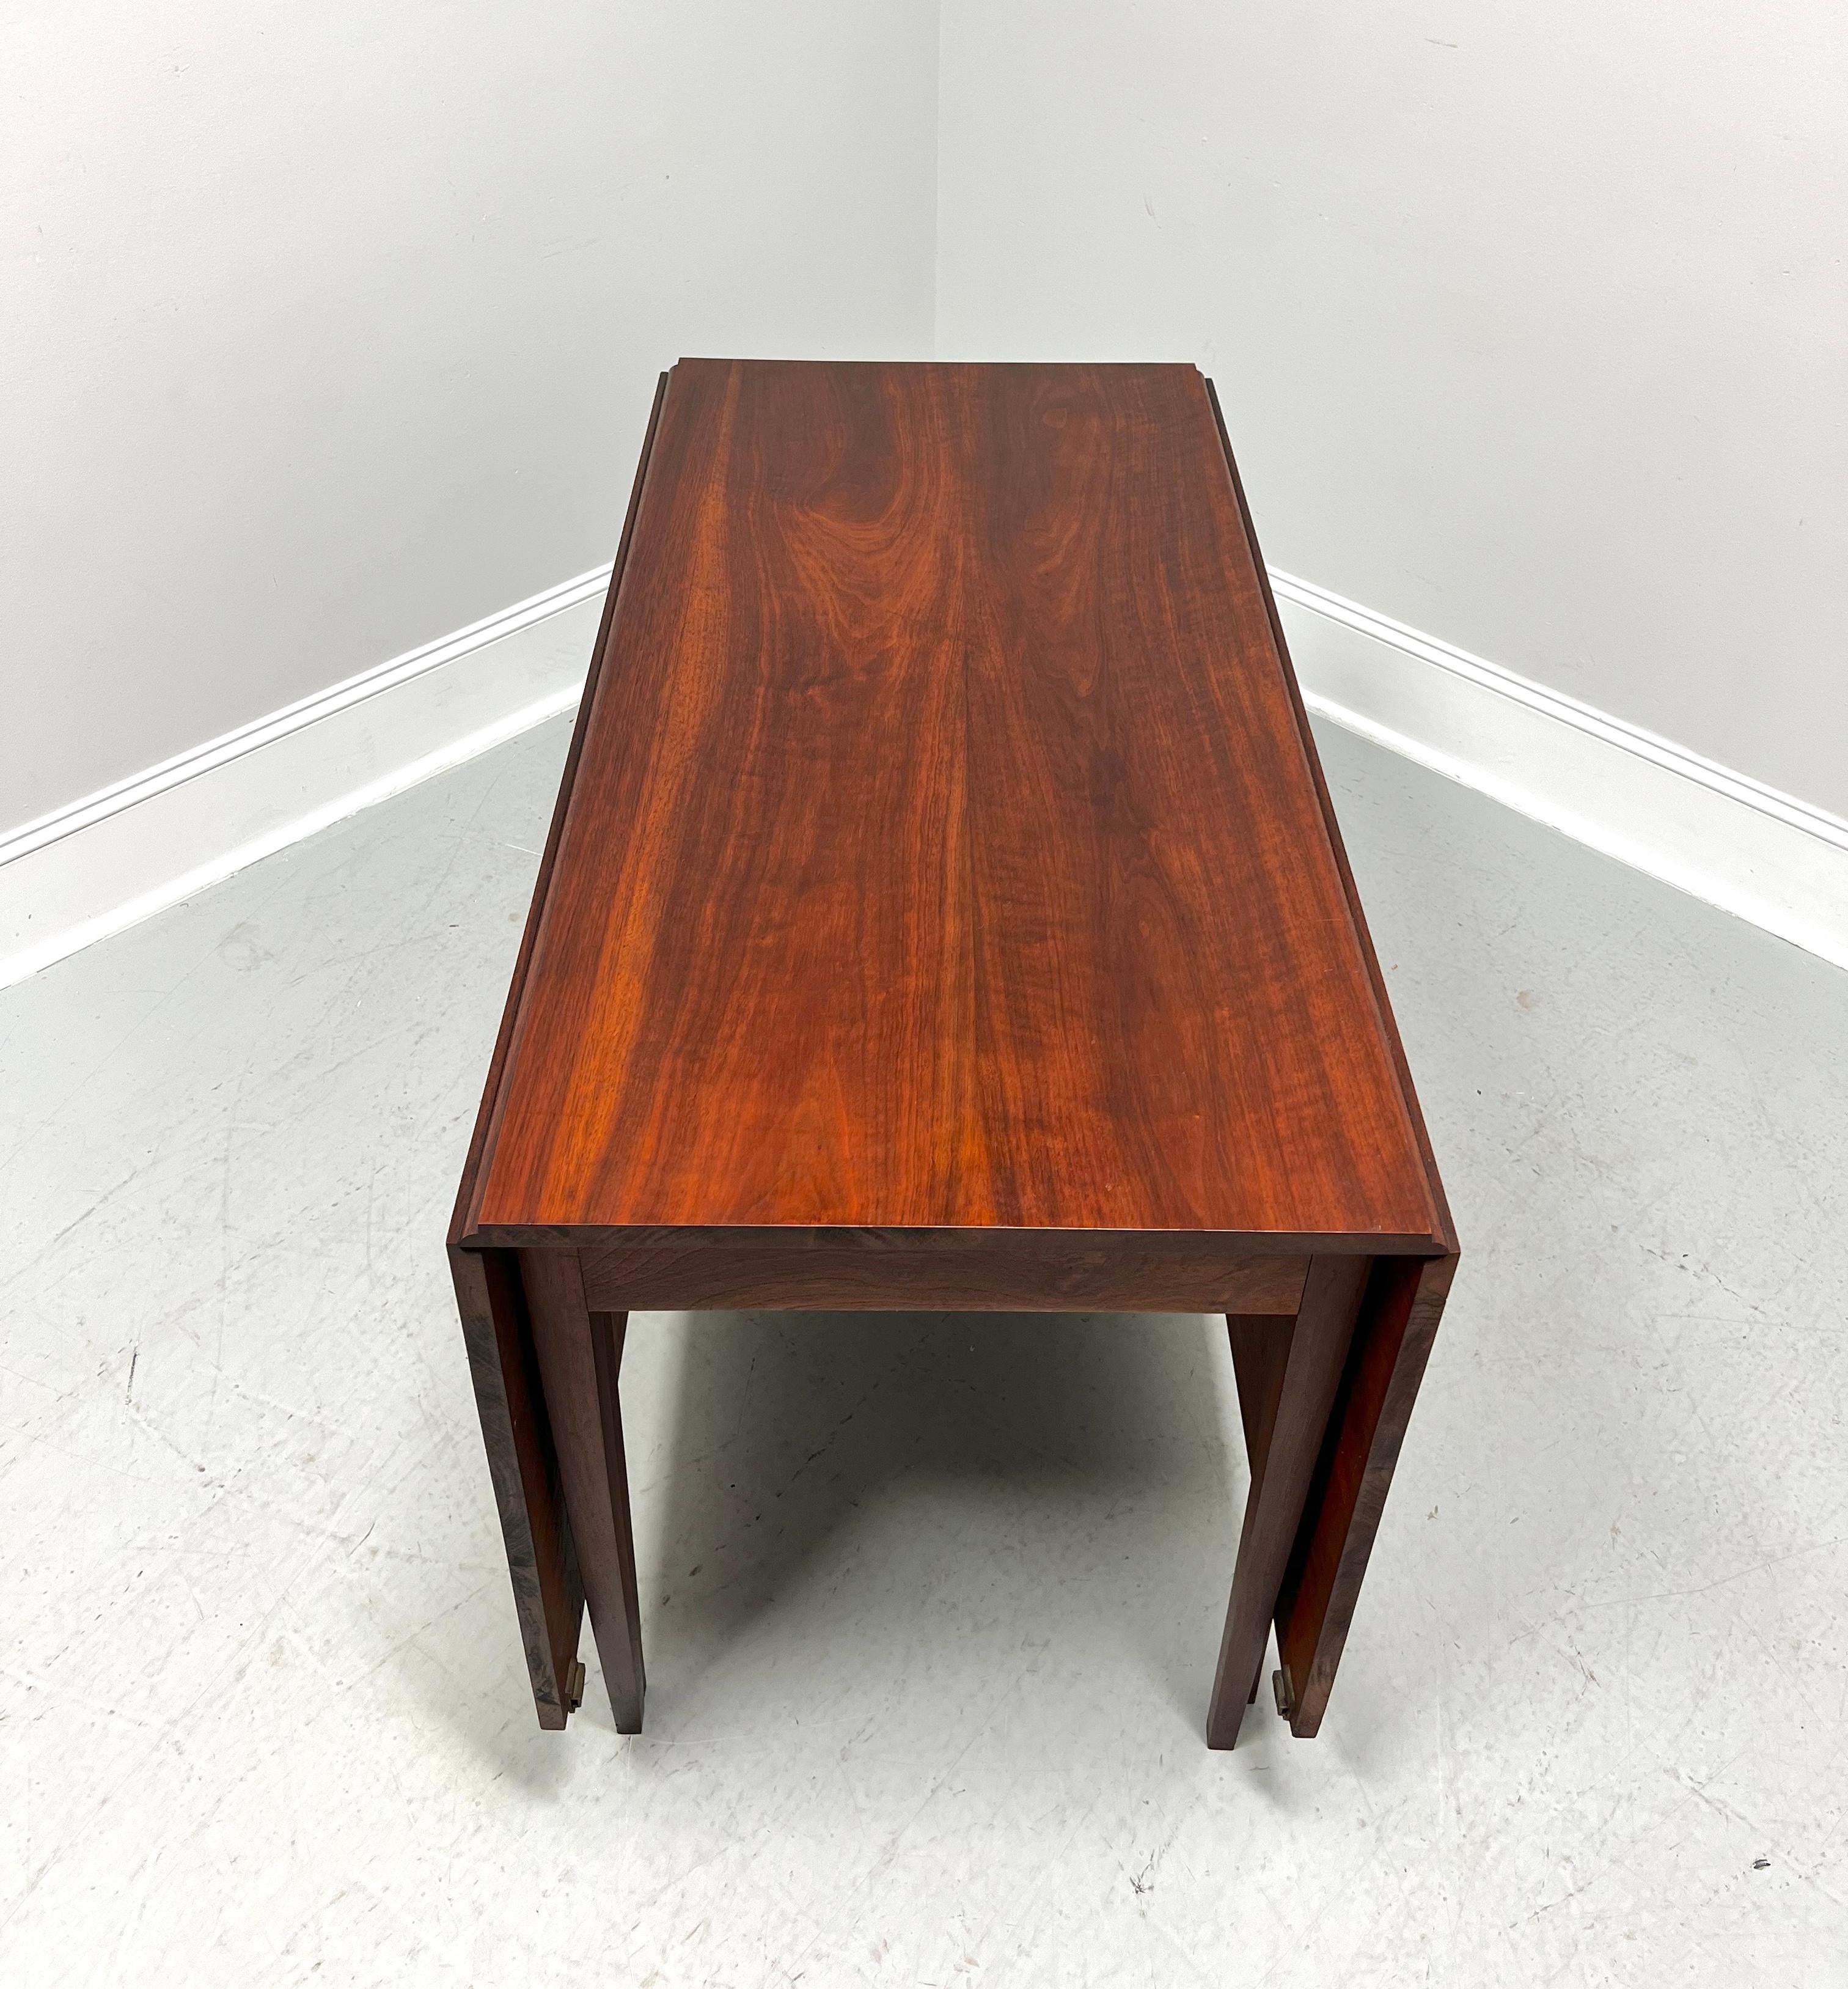 Antique Early 20th Century Walnut Hepplewhite Gateleg Drop-Leaf Dining Table For Sale 3